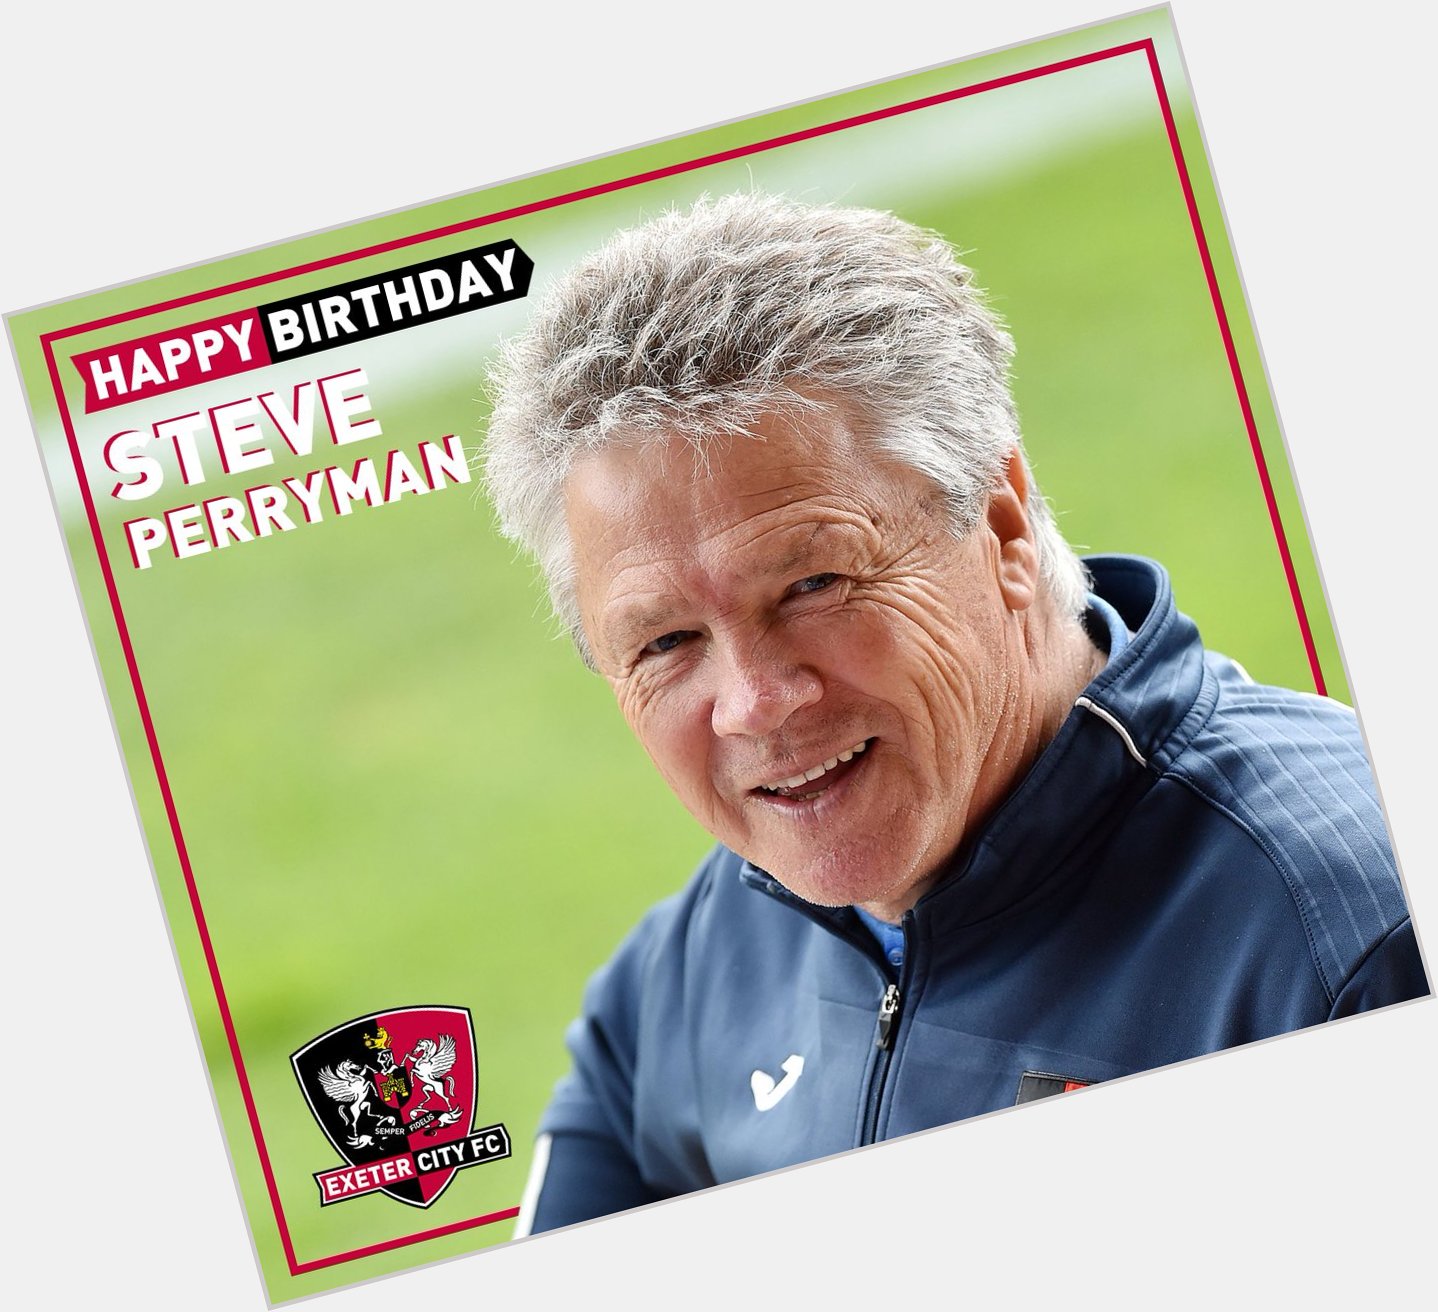  | Happy Birthday to City\s director of football, Steve Perryman!

Have a great day Steve! 